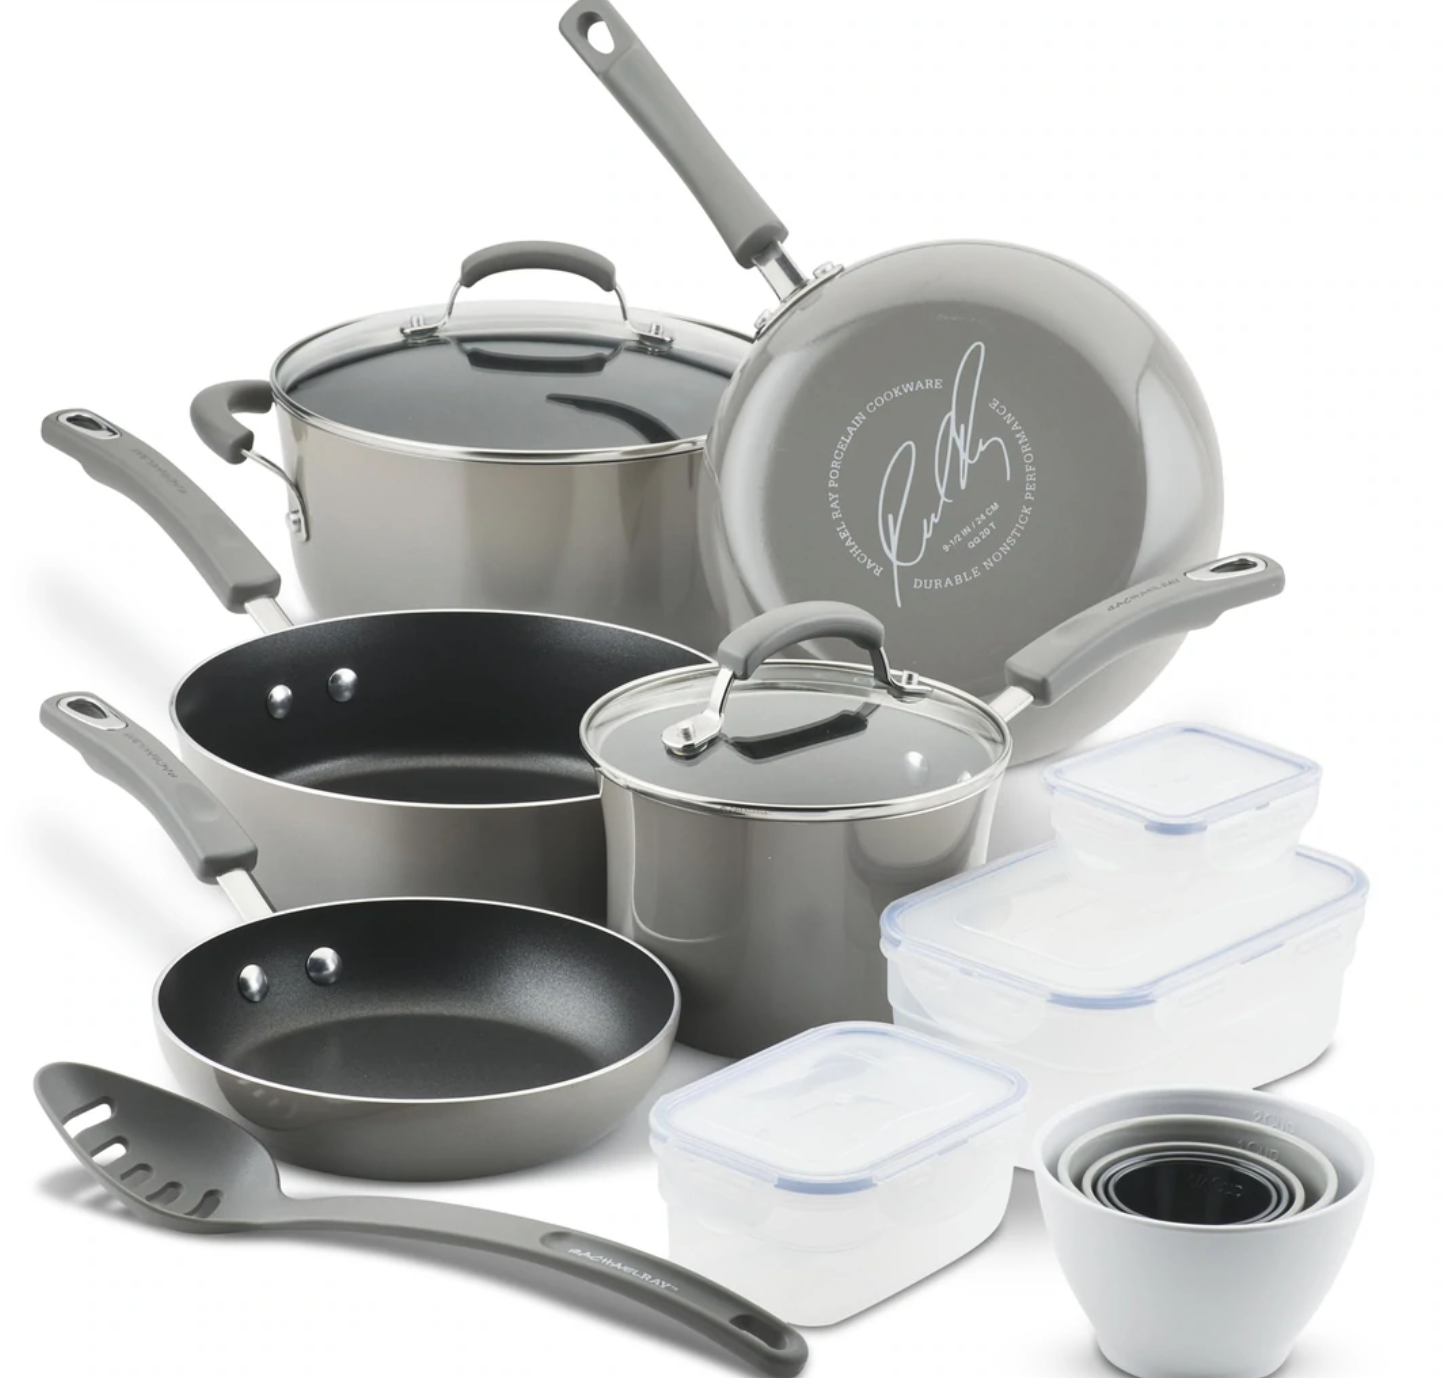 Rachael Ray Winter Clearance Sale: It's Your Last Chance to Get These  Pieces Before They're Gone!